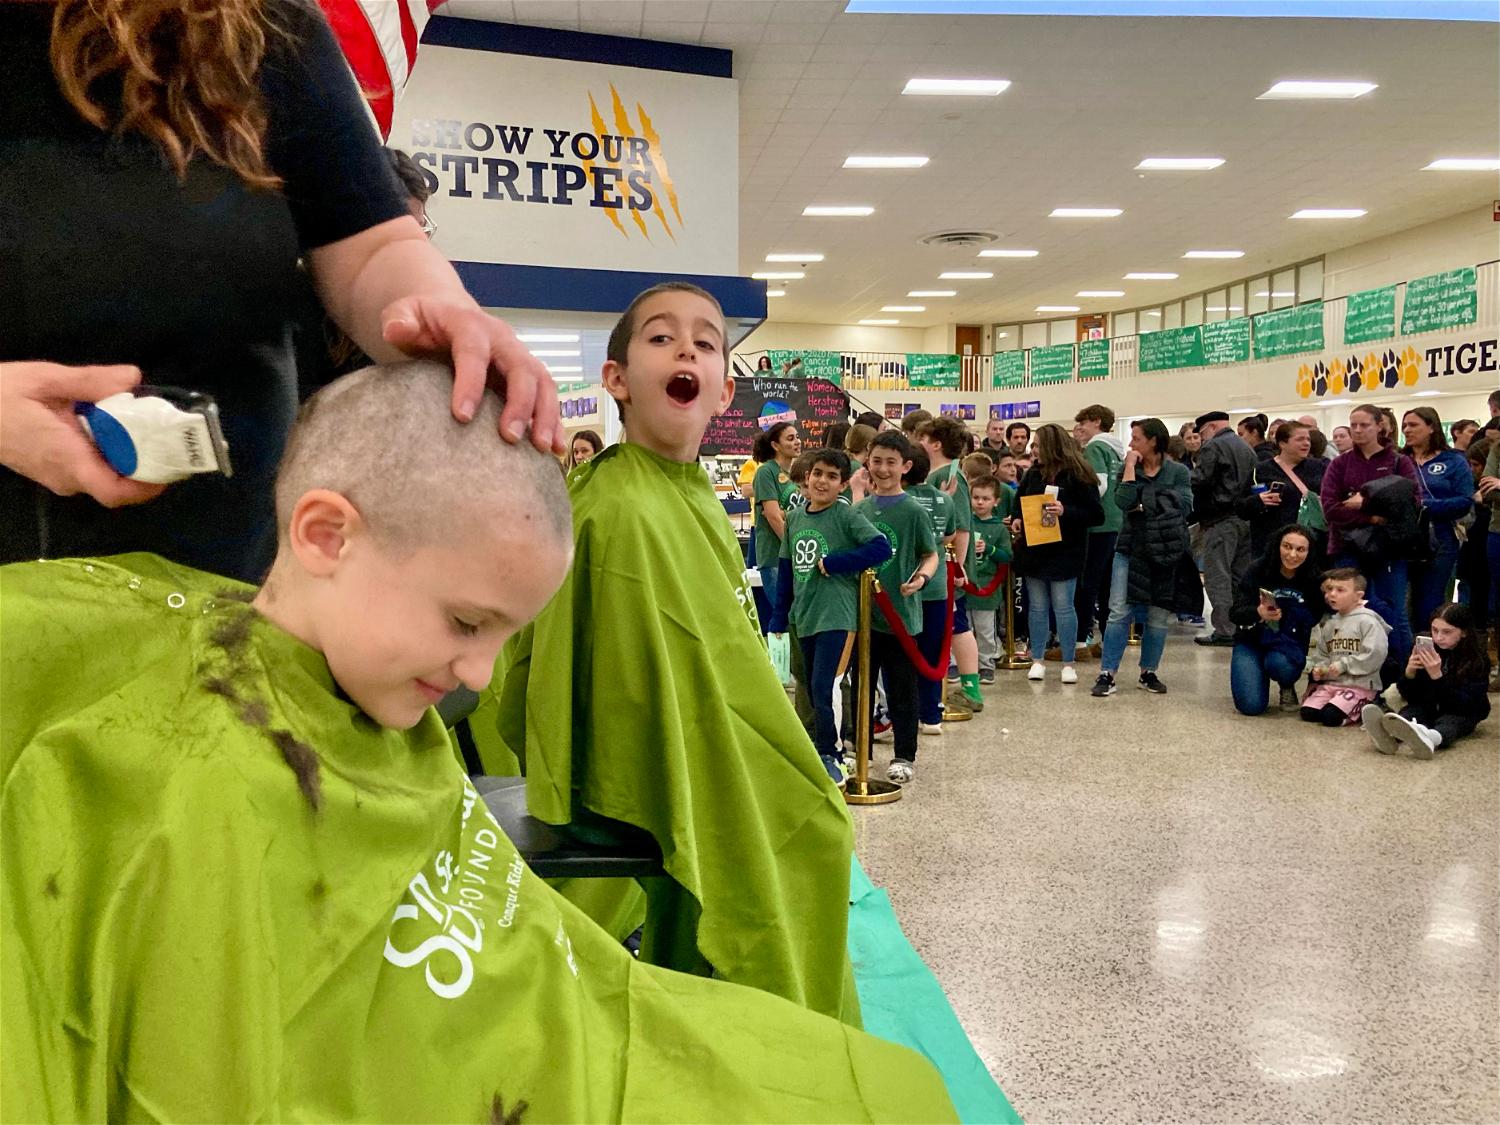 Members of the Fifth Avenue Fightin’ Irish at last week’s Brave the Shave event, which raised over $50,000 for pediatric cancer.